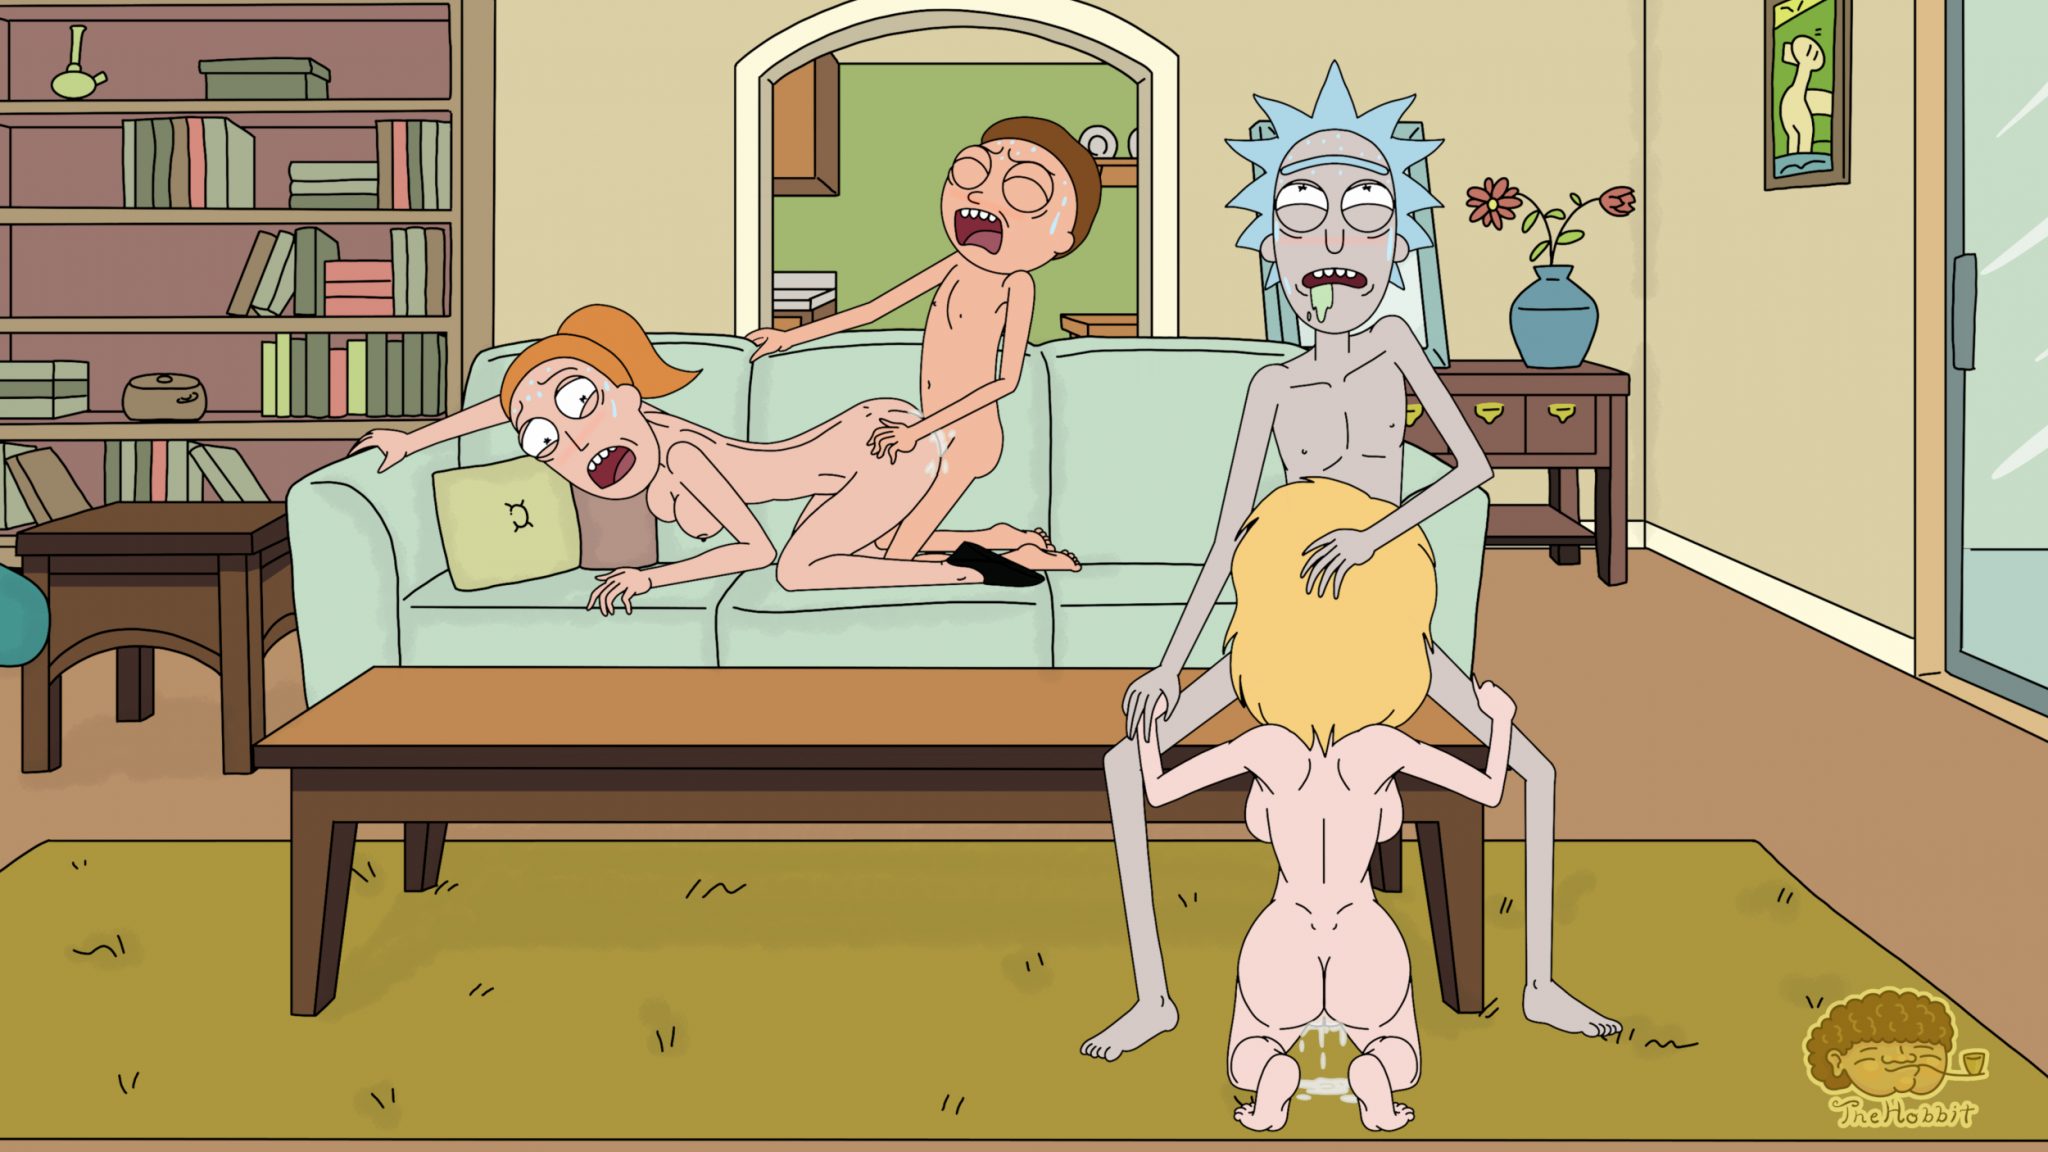 September 10, 2021September 10, 2021. rick and morty. rick and morty summer...